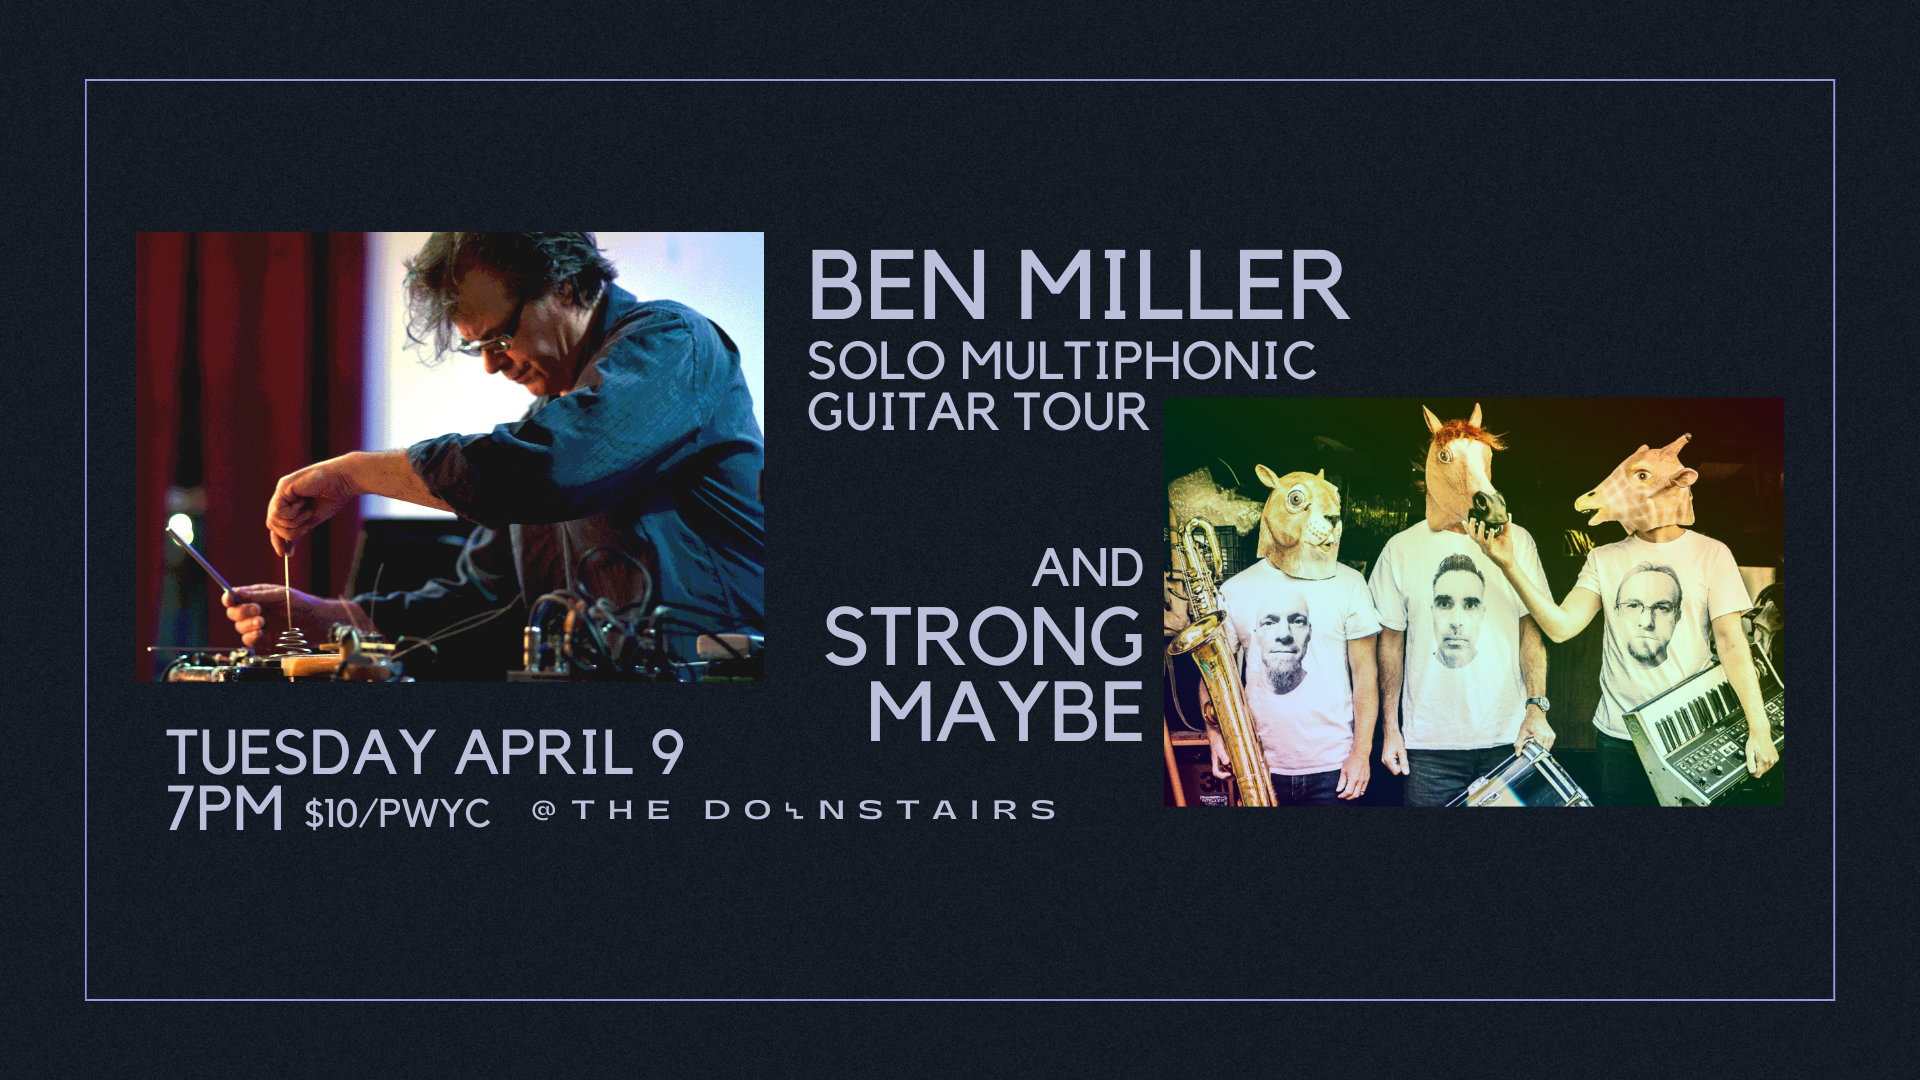 Ben Miller - Solo Multiphonic Guitar Tour & Strong Maybe